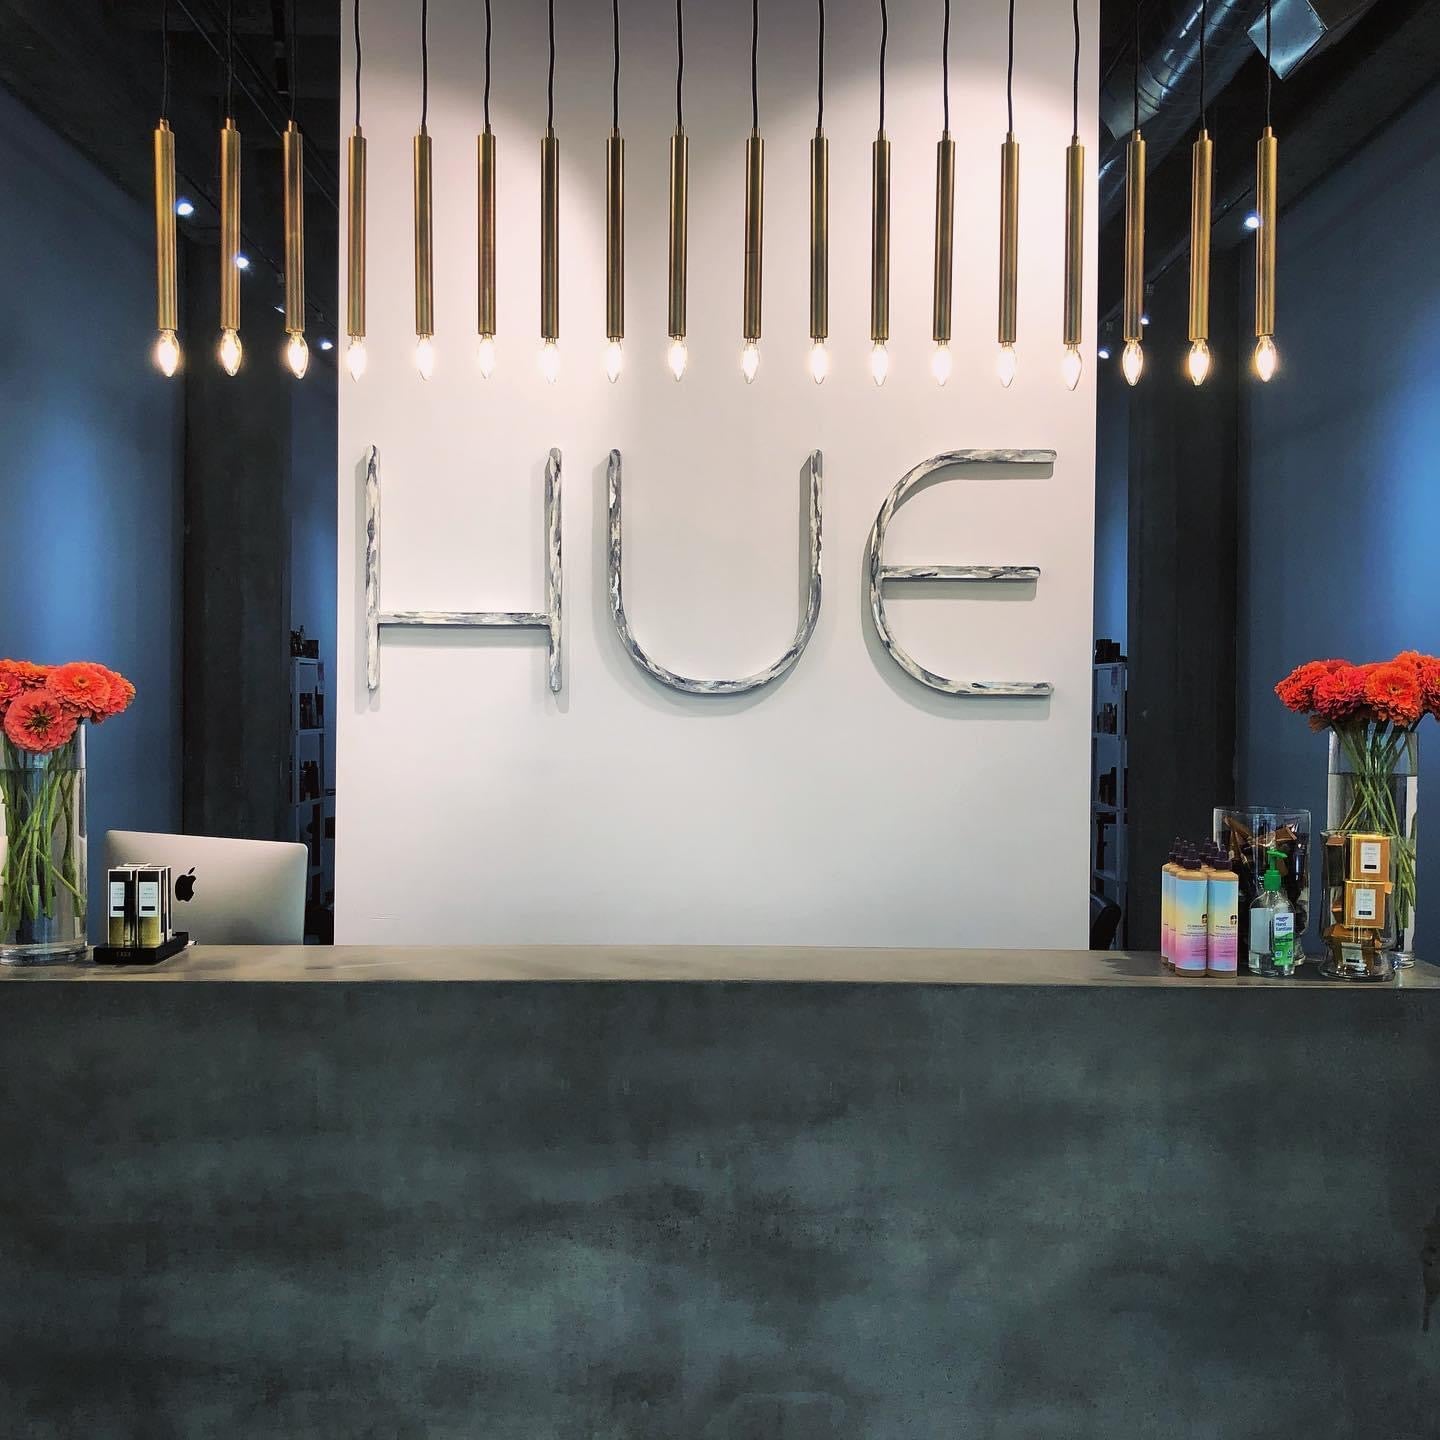 Recommended By Hue Salon